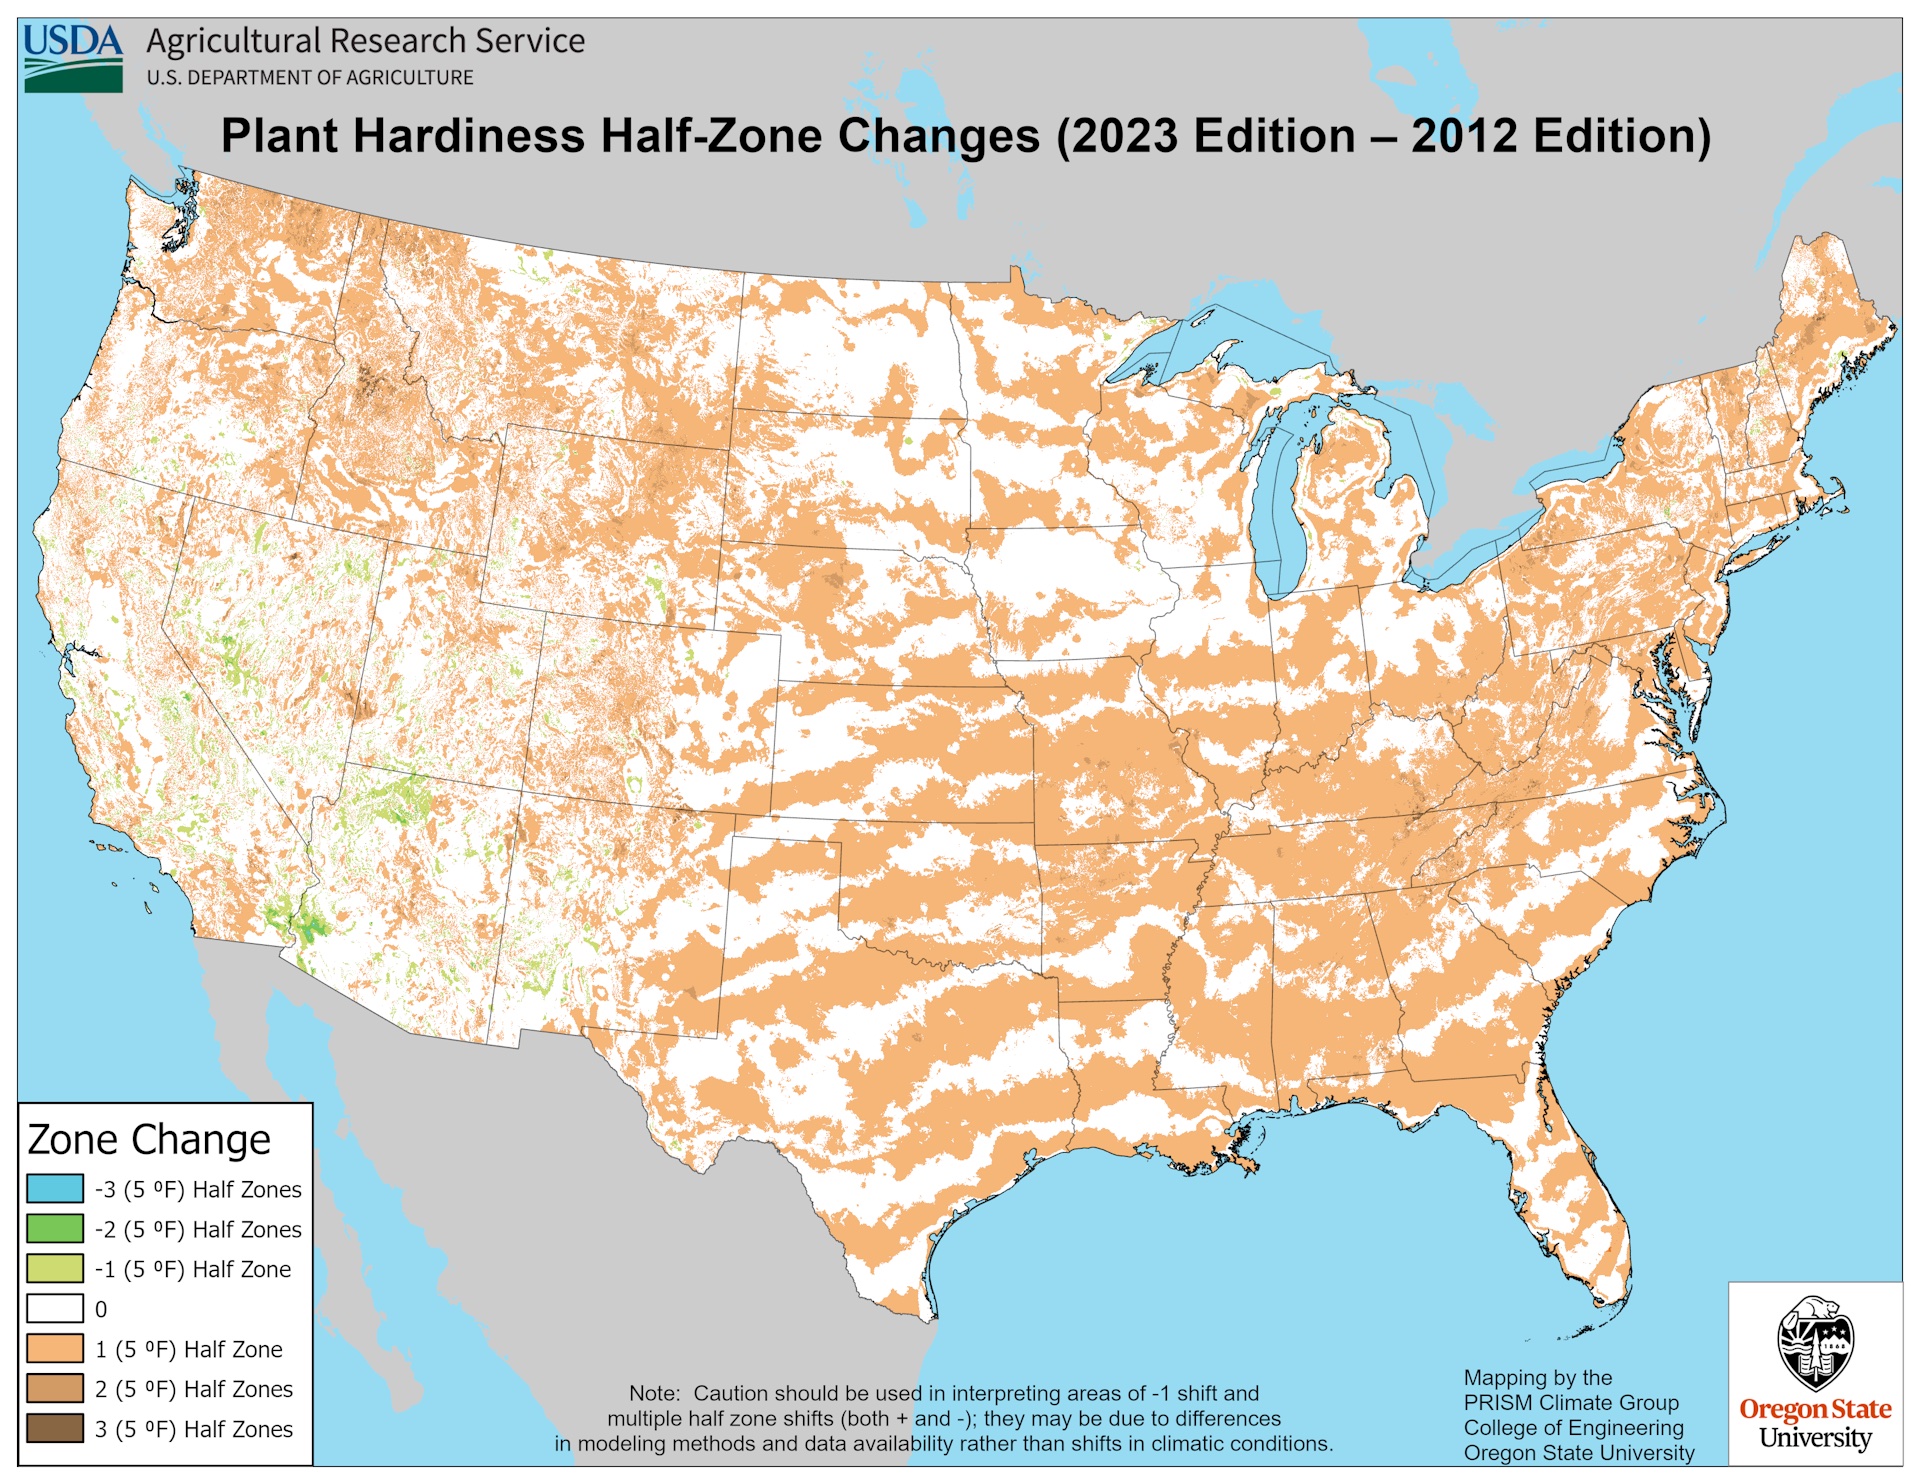 Map of the united states showing changes in plant hardiness half-zone classifications between the 2012 and 2023 editions.